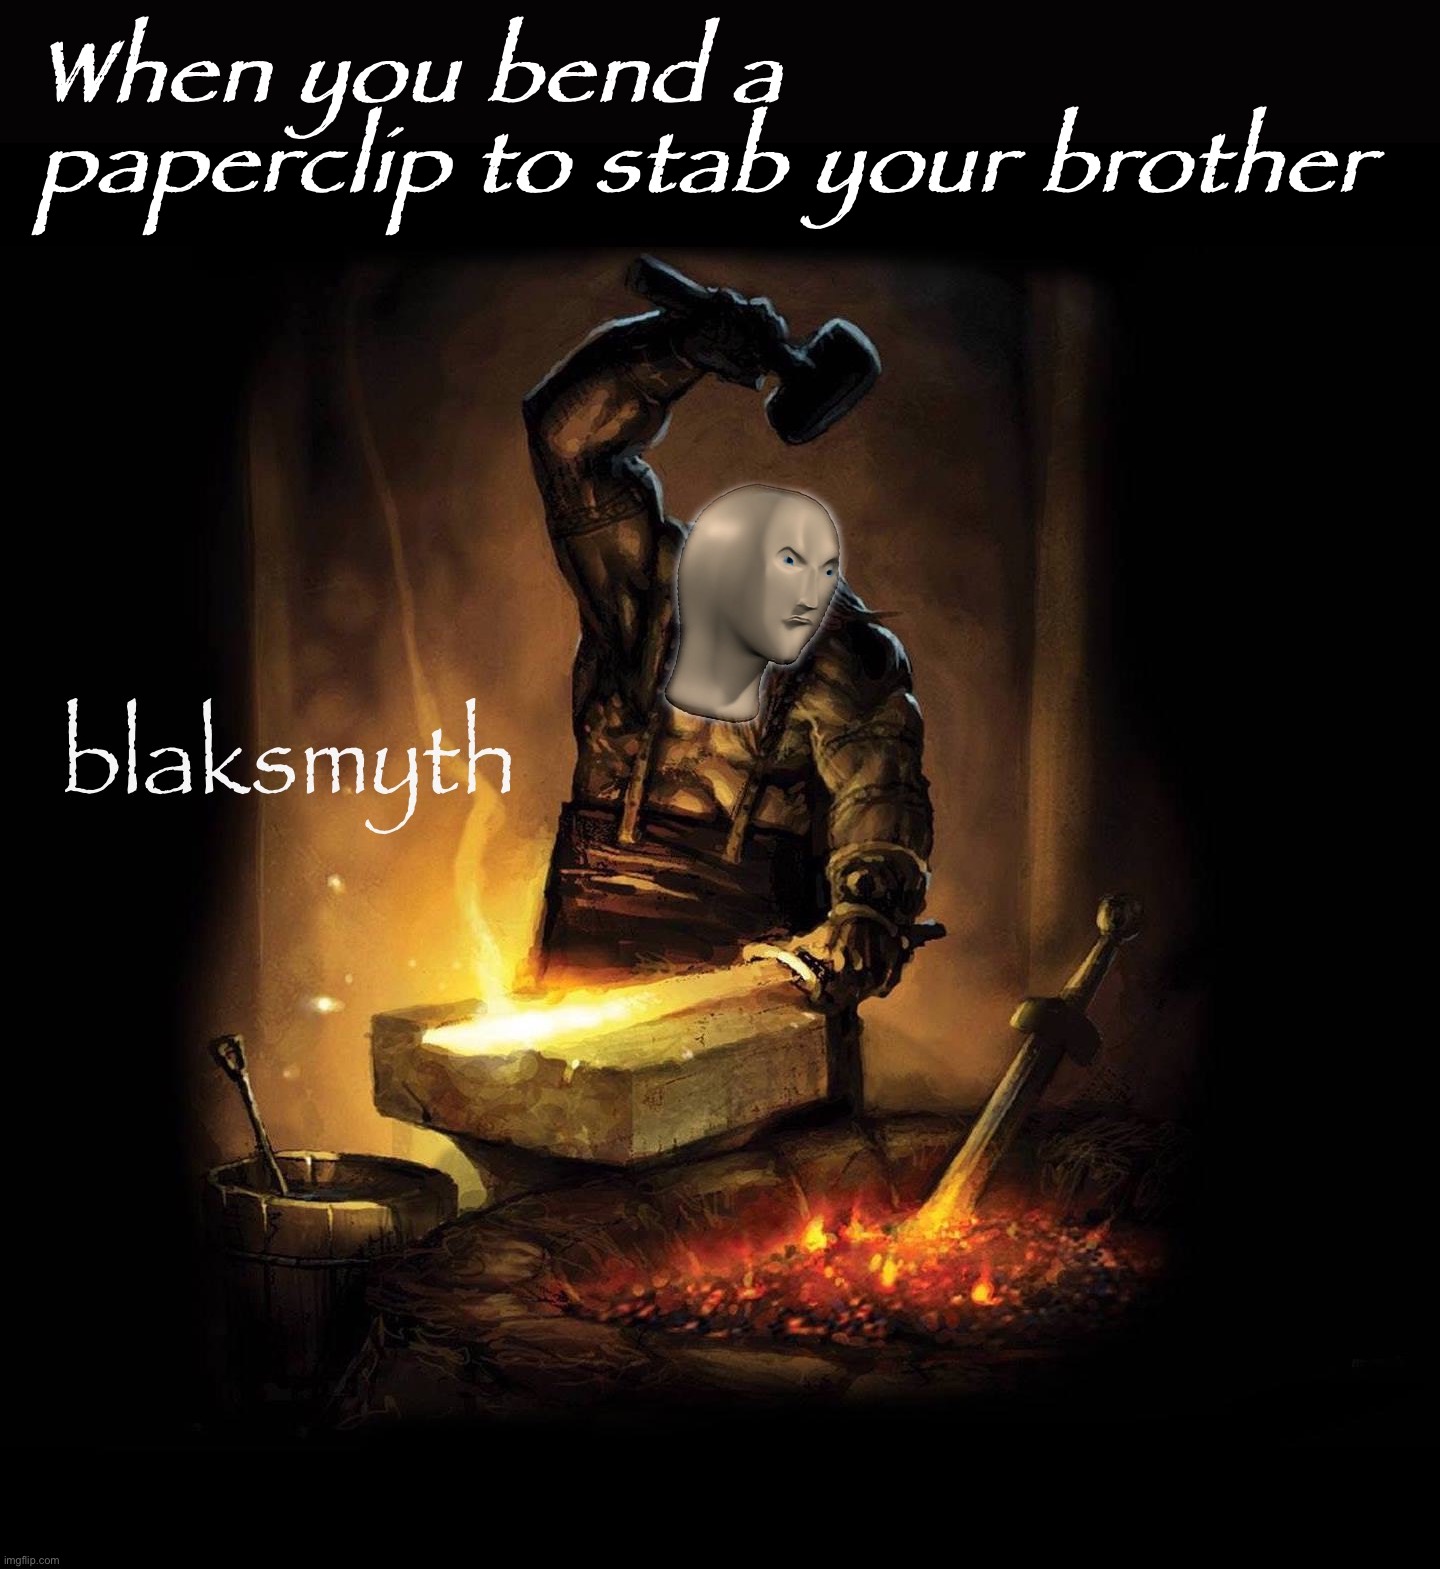 Meme man blaksmyth | When you bend a paperclip to stab your brother | image tagged in meme man blaksmyth | made w/ Imgflip meme maker